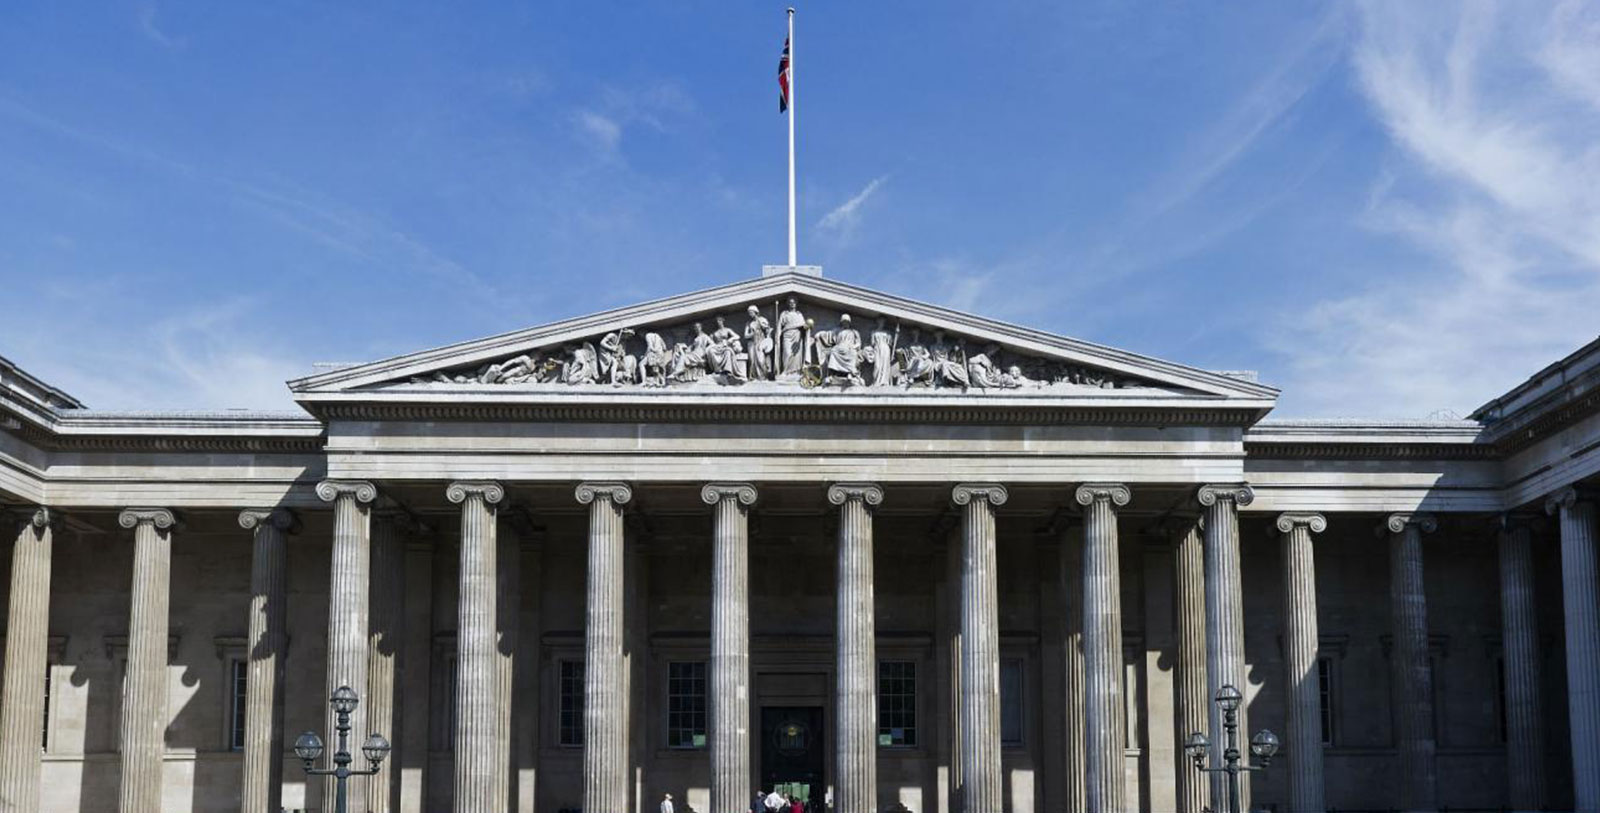 Experience the brilliant exhibitions of the British Museum.